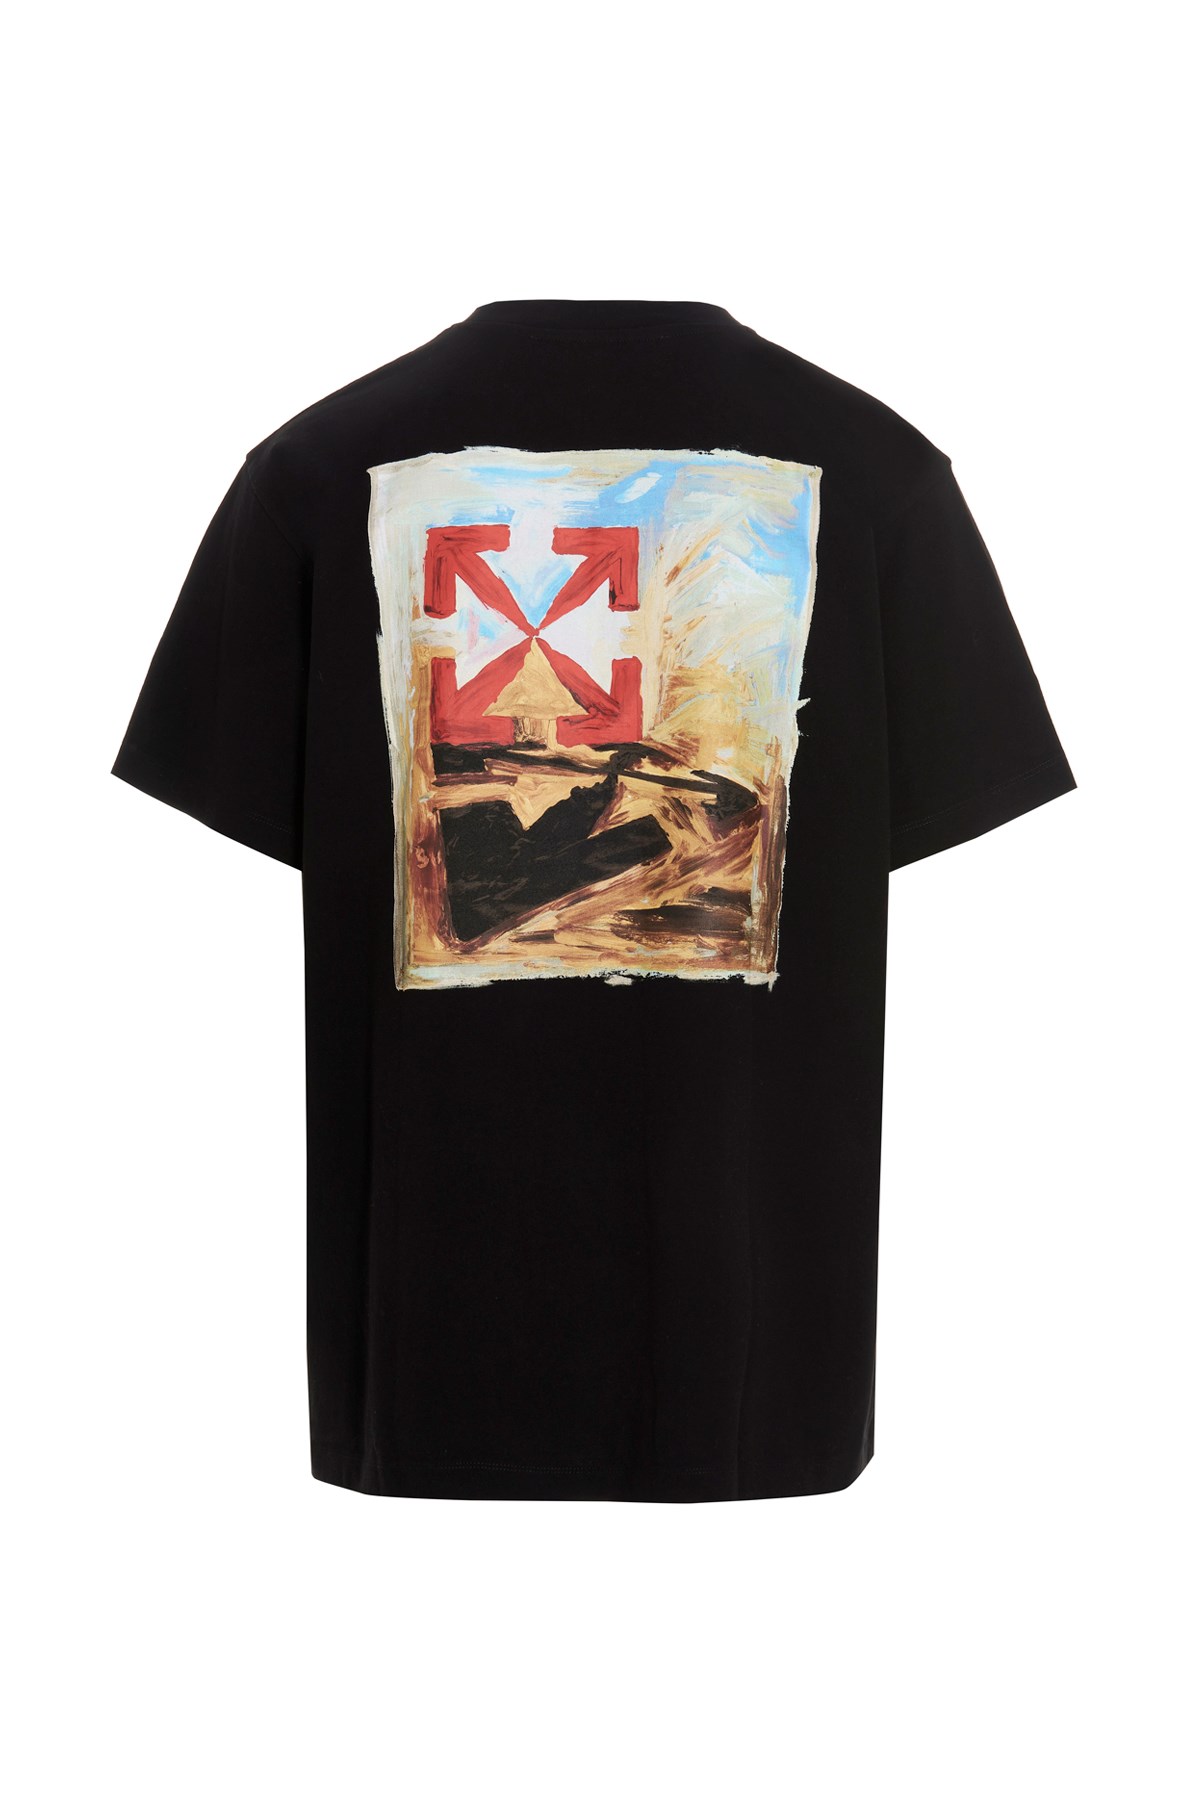 OFF-WHITE 'Arrow On Canvas’ T-Shirt